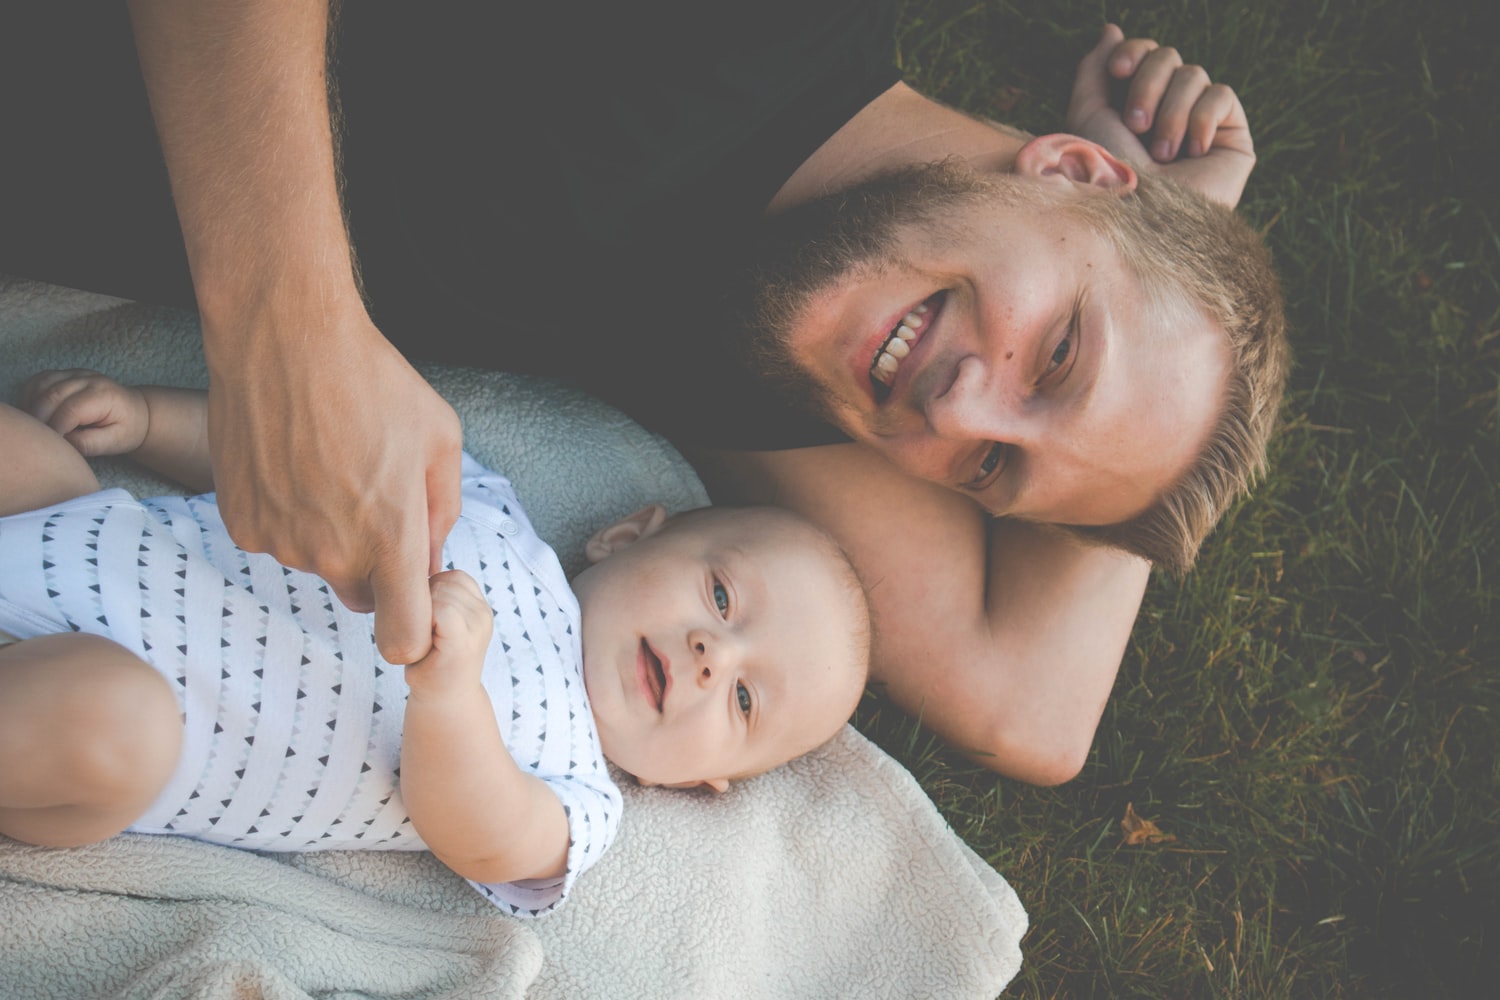 Growing Recognition of Fatherhood in Hungary Via New Benefits & Rights